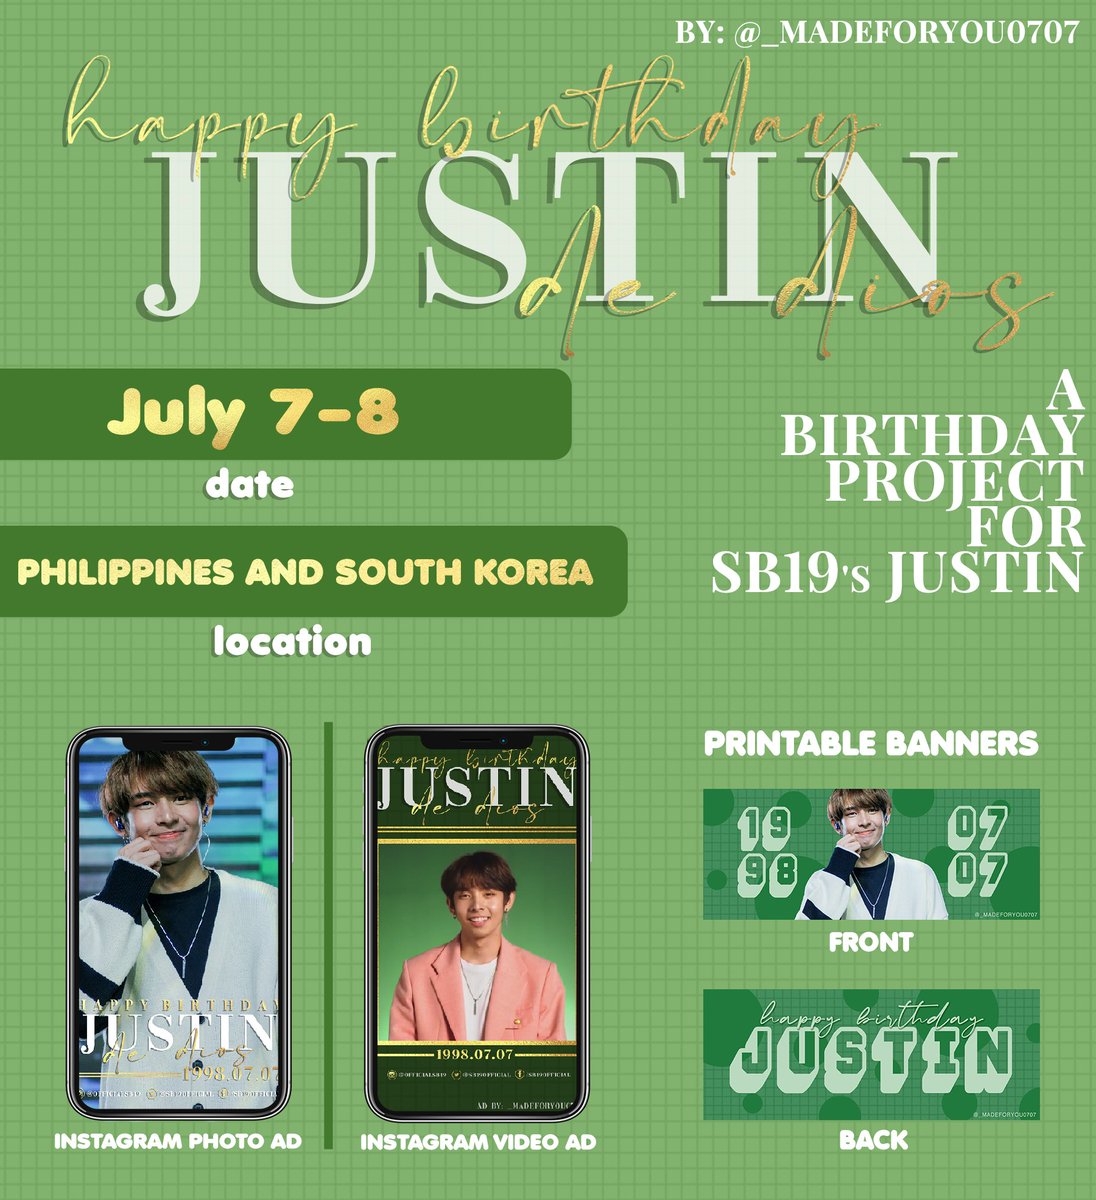 Instagram Ad & Printable banners!By:  @_madeforyou0707 : If you see this ad feel free to tag her or on instagram and get a chance to have a special photocard. Also, printable banner will be posted tomorrow!JUSTINDay D1andONLY @jah447798  @SB19Official